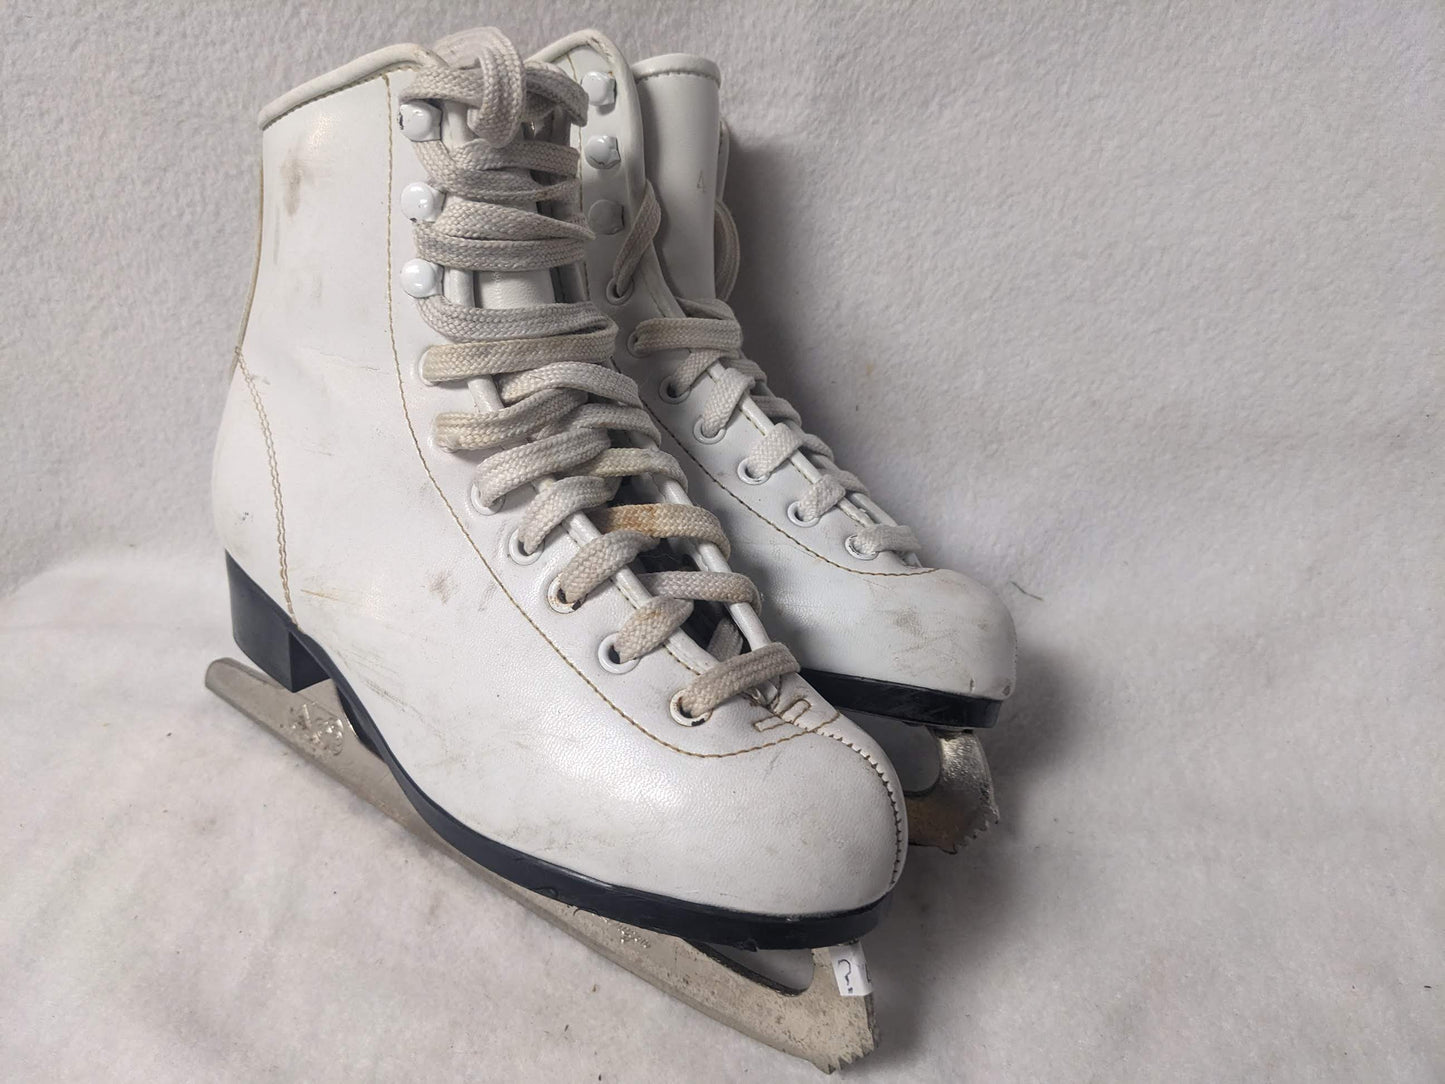 Youth Figure Ice Skates Size 4 Color White Condition Used